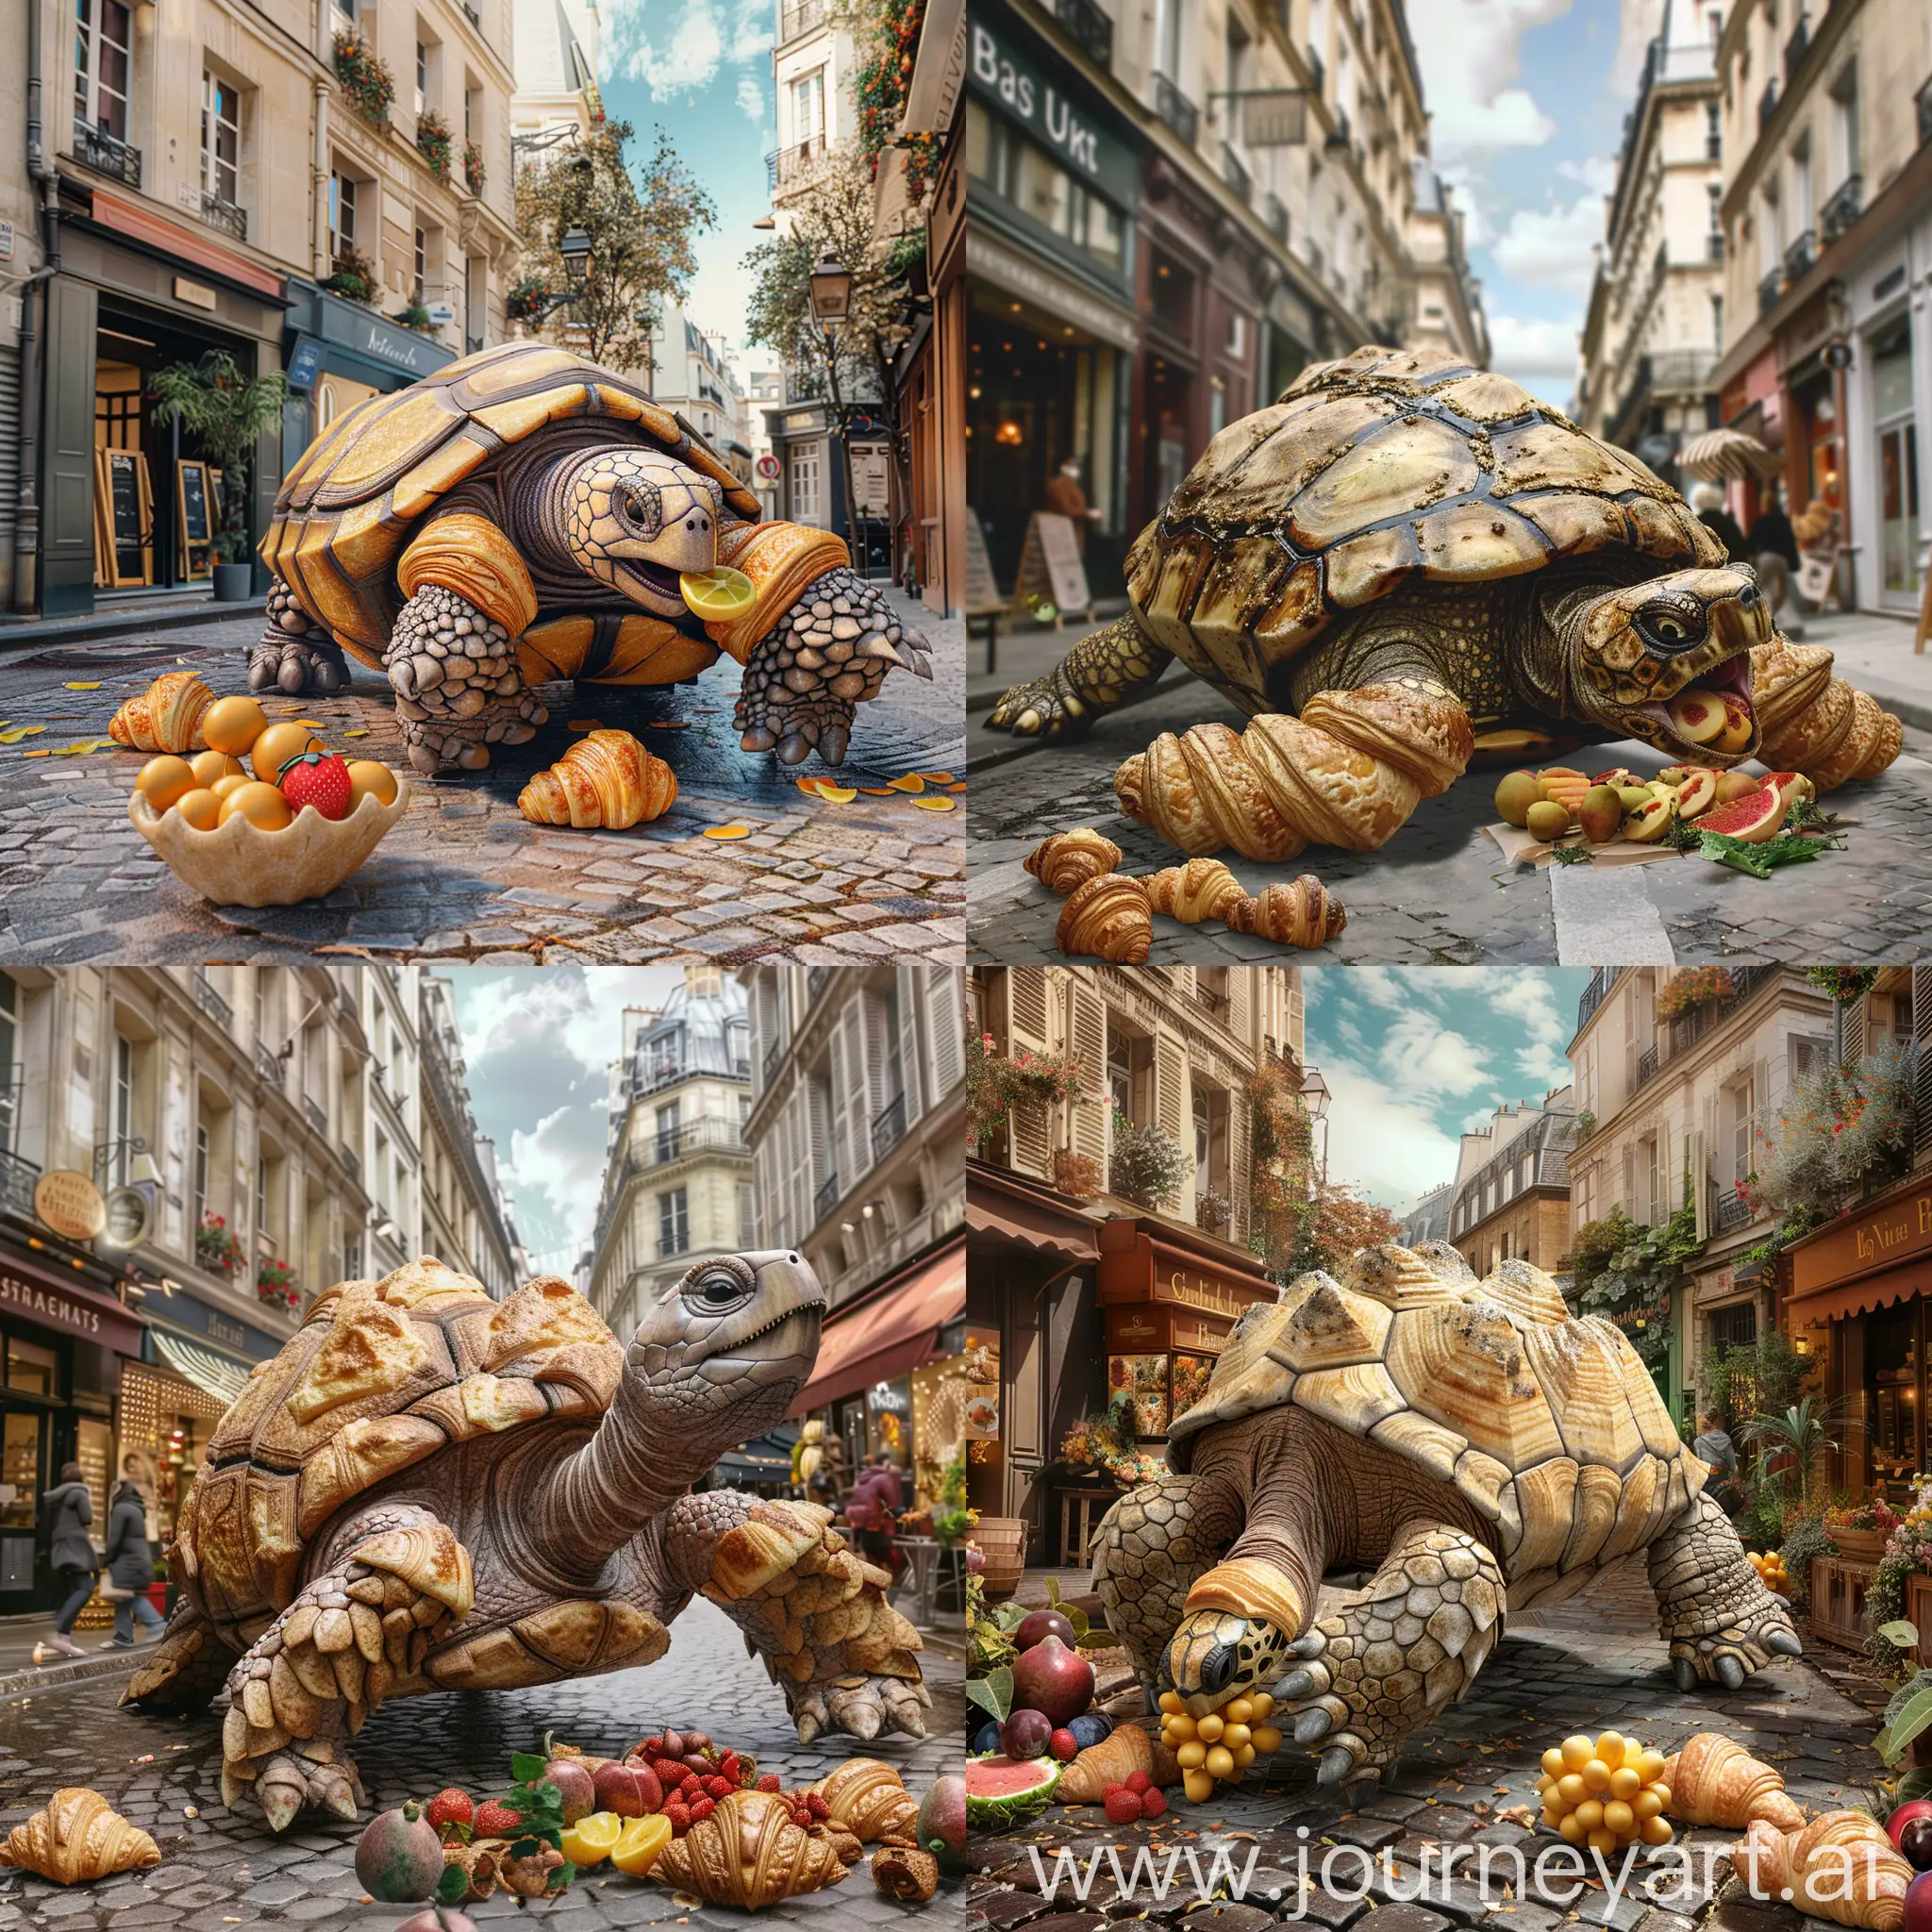 Giant-Croissanttextured-Turtle-Enjoying-Pastry-Fruit-in-Parisian-Streets-with-a-Touch-of-Jurassic-Park